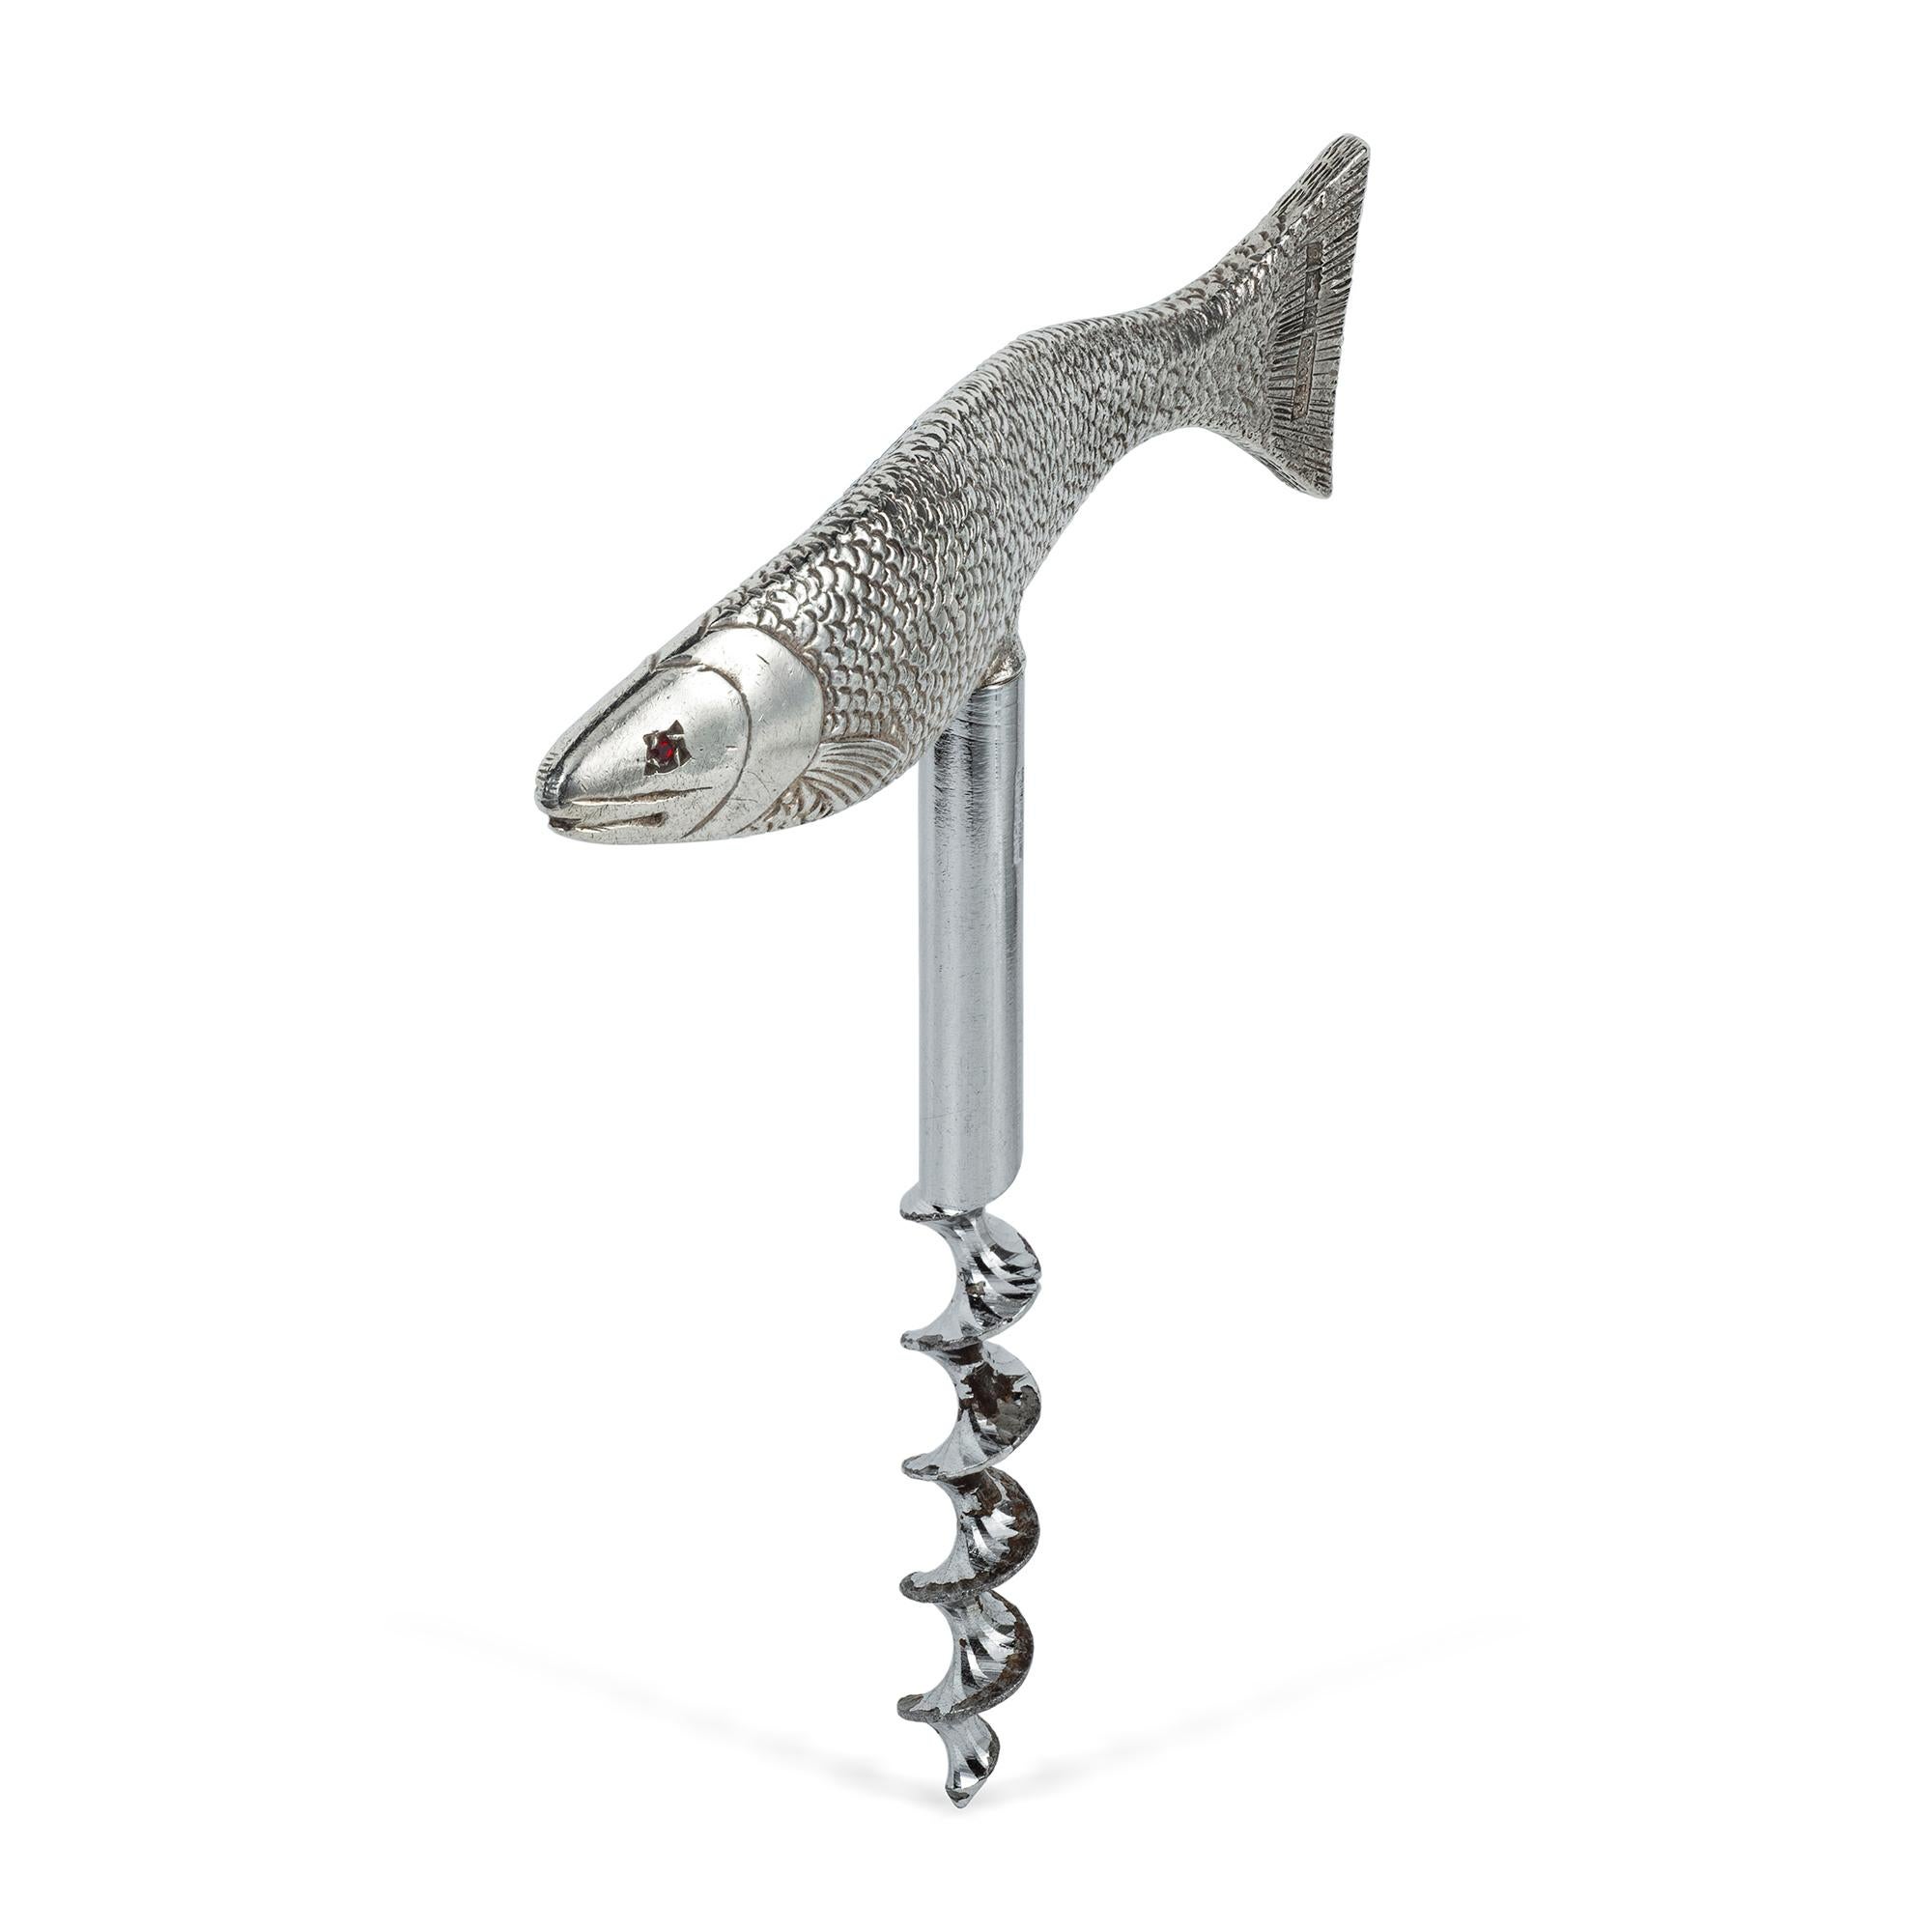 Retro A Sterling Silver Handled Fish Model Cork Screw For Sale